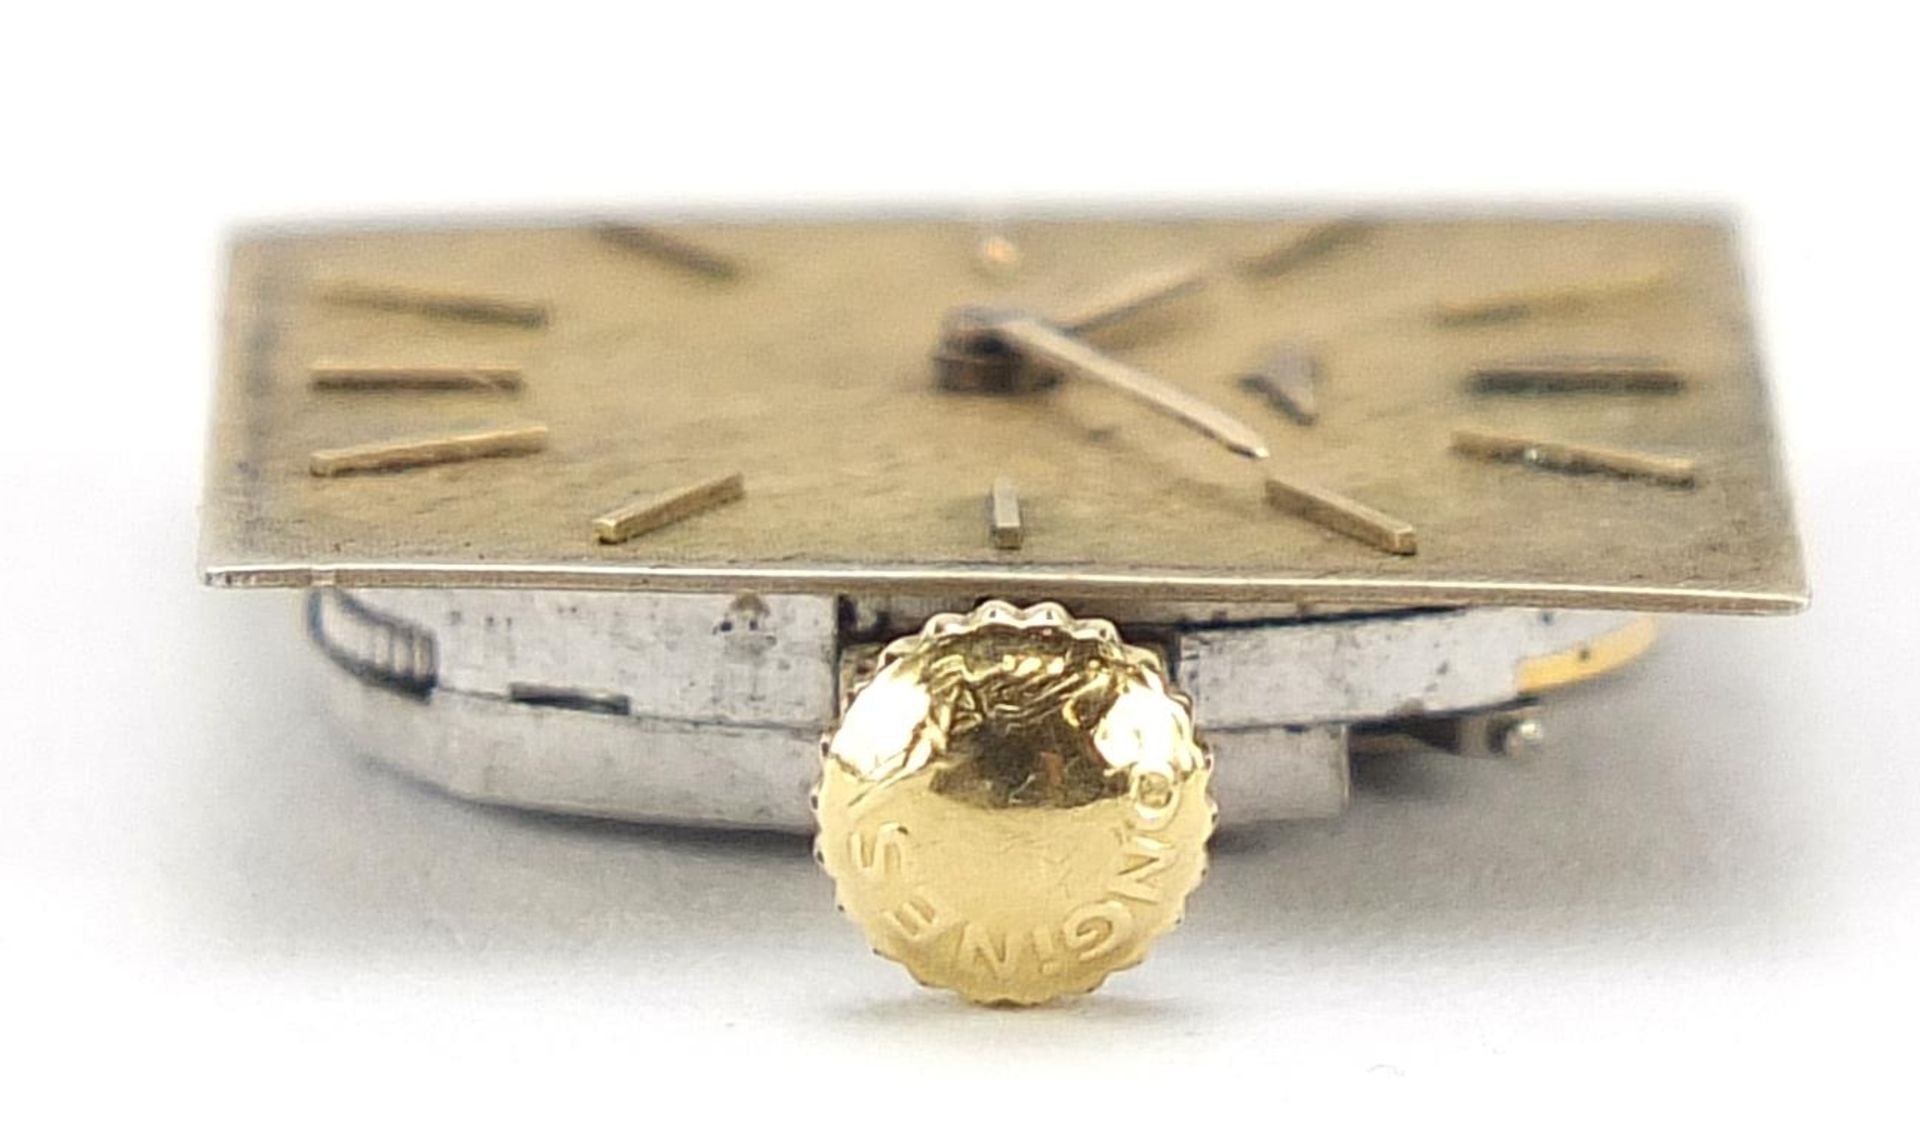 Vintage Longines wristwatch movement and crystal, numbered 13077360, 19mm wide - Image 4 of 4